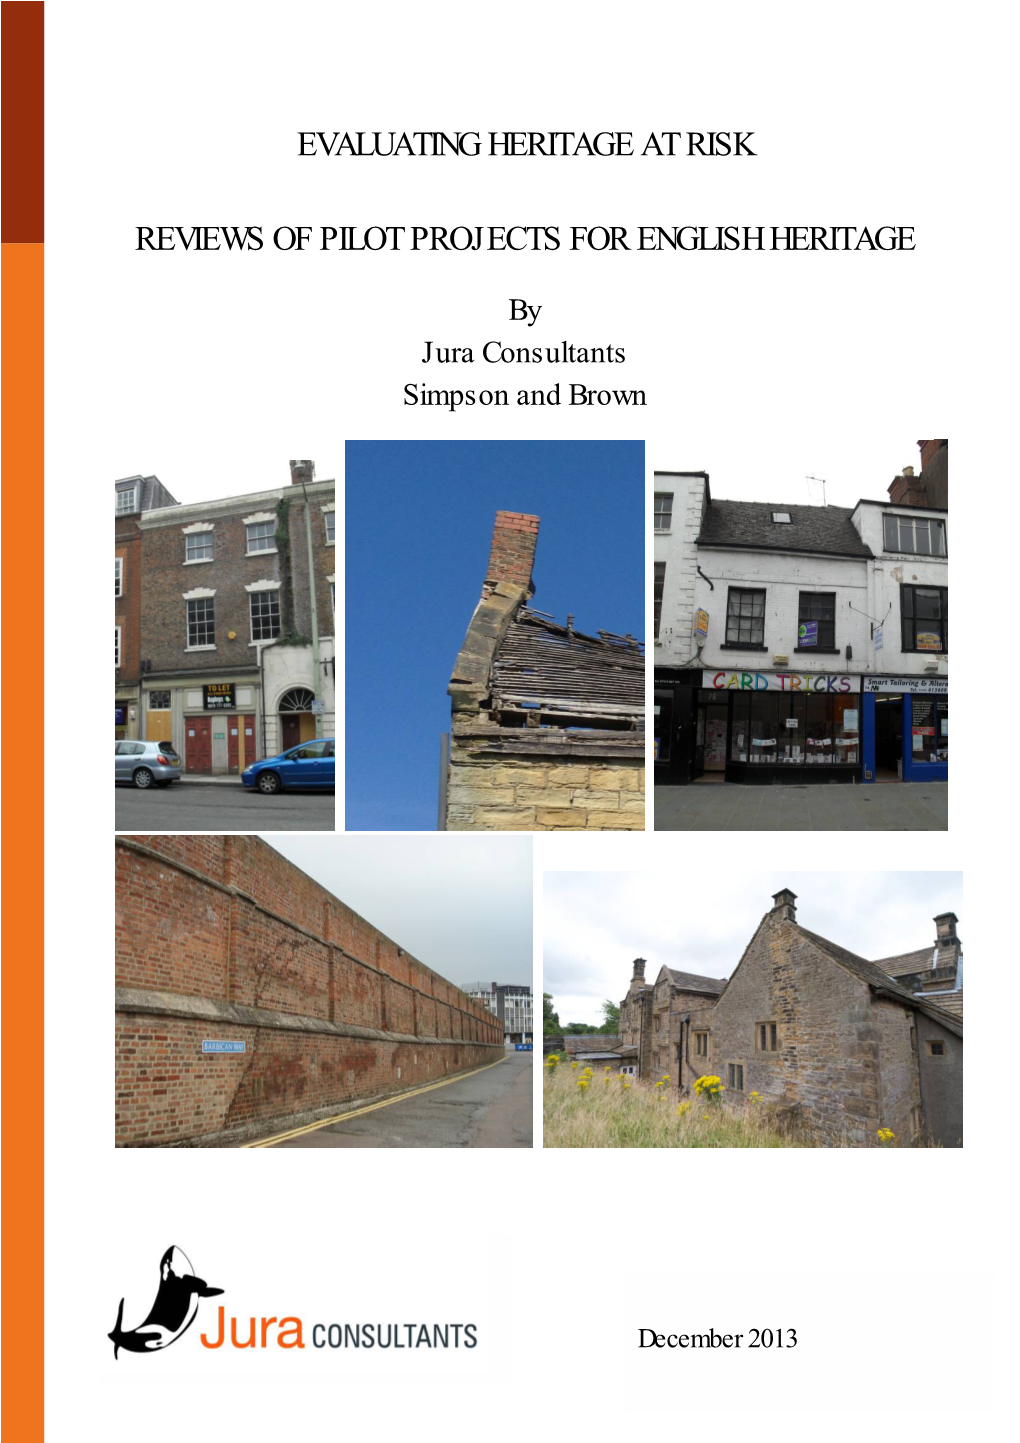 Evaluating Heritage at Risk: Reviews of Pilot Projects for English Heritage